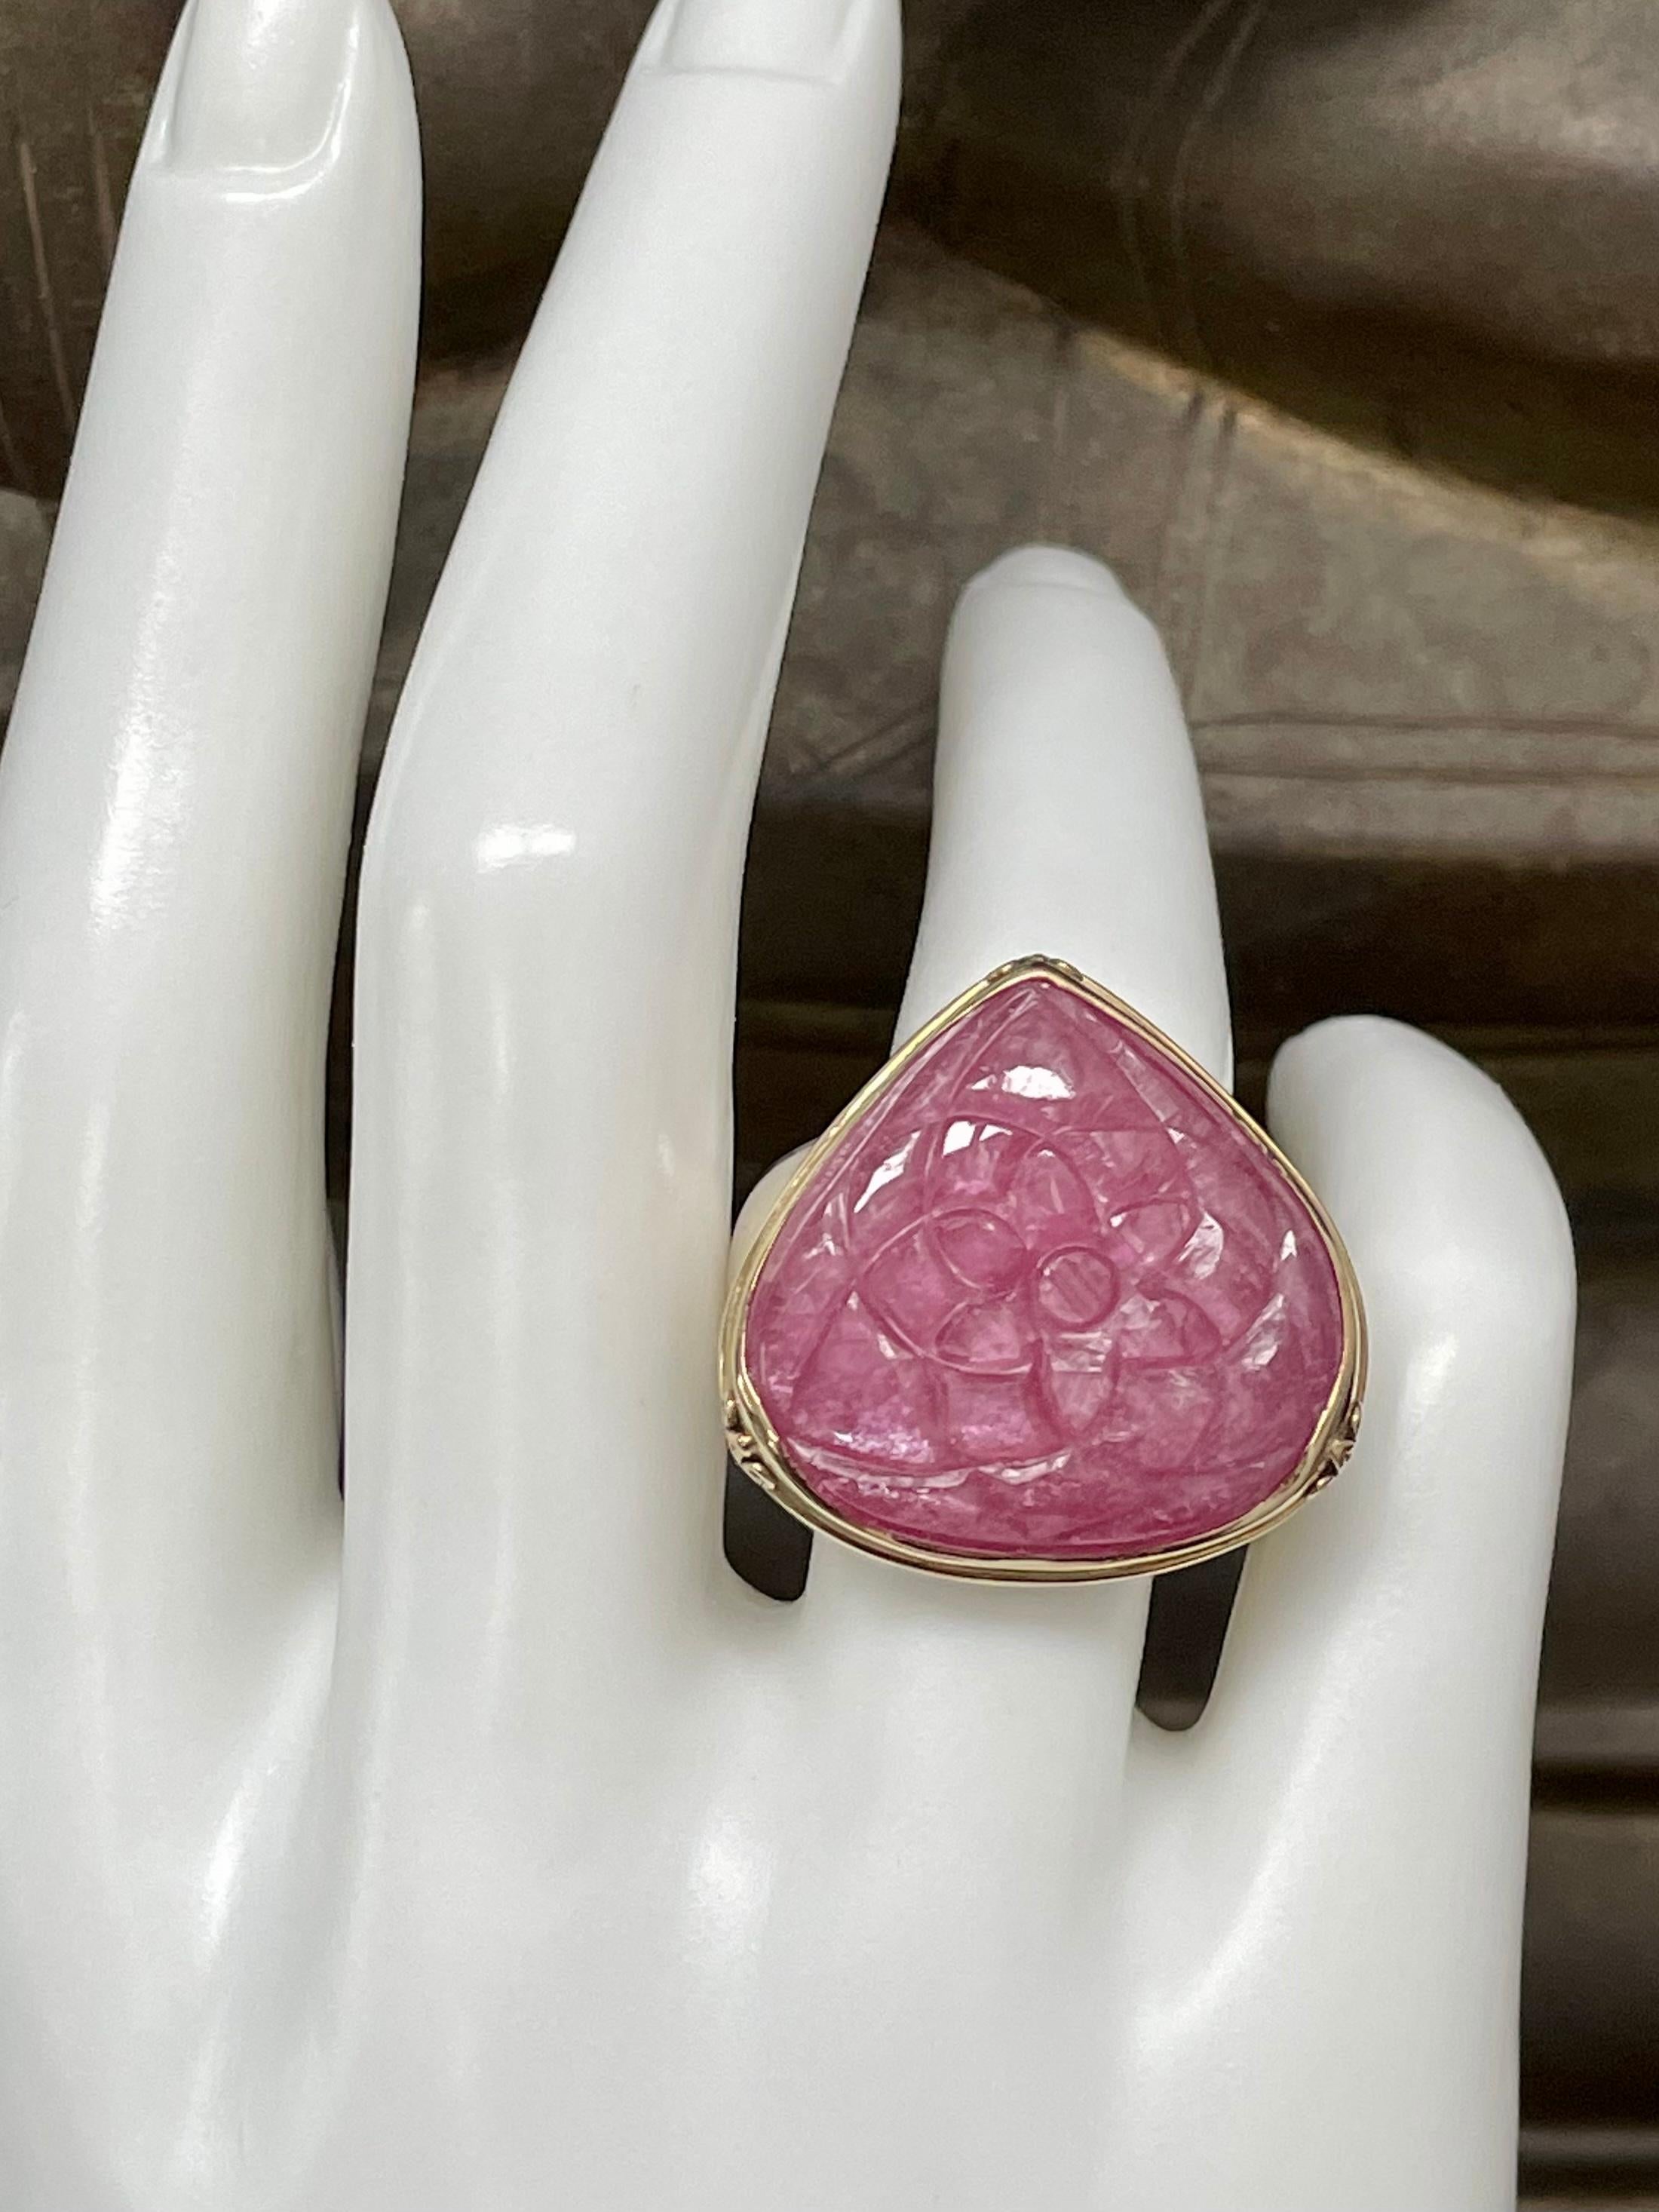 A large, 22 mm wide pear shaped florally carved pink ruby cabochon is held in an 18K gold bezel with 3 small corner spiral ornaments atop a wide sterling silver shank in this statement design. 
A lot of ruby and ring for an affordable price! 